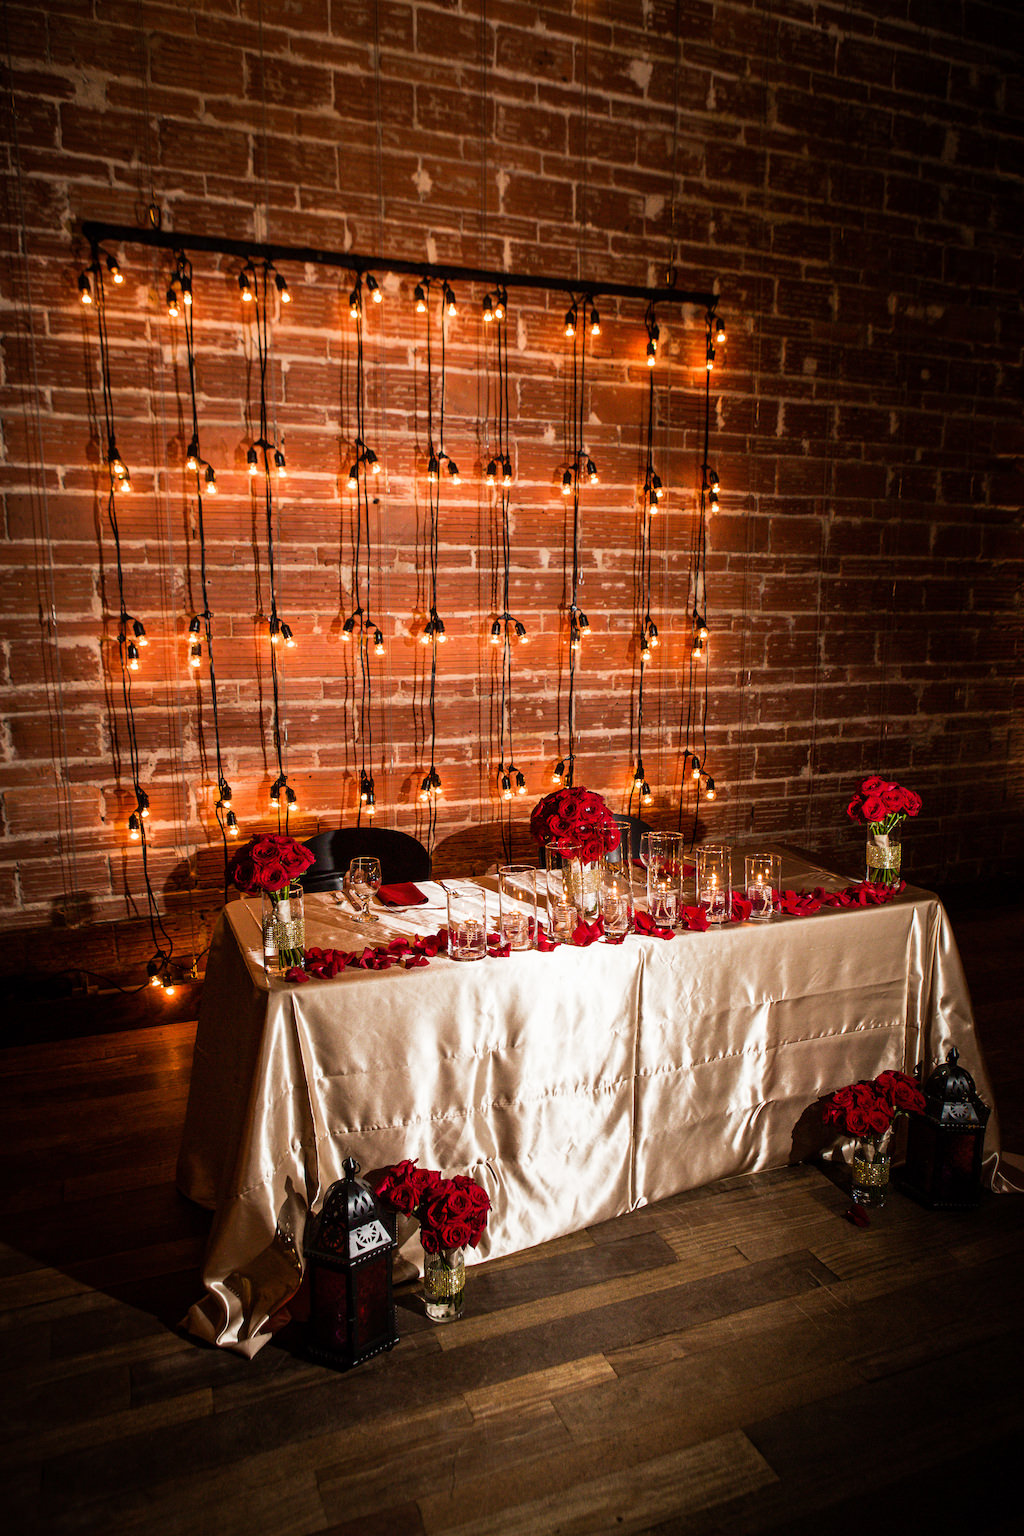 Great Gatsby Inspired Indoor Wedding Reception at St. Pete Venue and Sweetheart Table with Champagne Satin Linens, Red Roses Bouquets and Petals, Black Lantern and Bistro Light Backdrop | Downtown St. Pete Wedding Venue NOVA 535